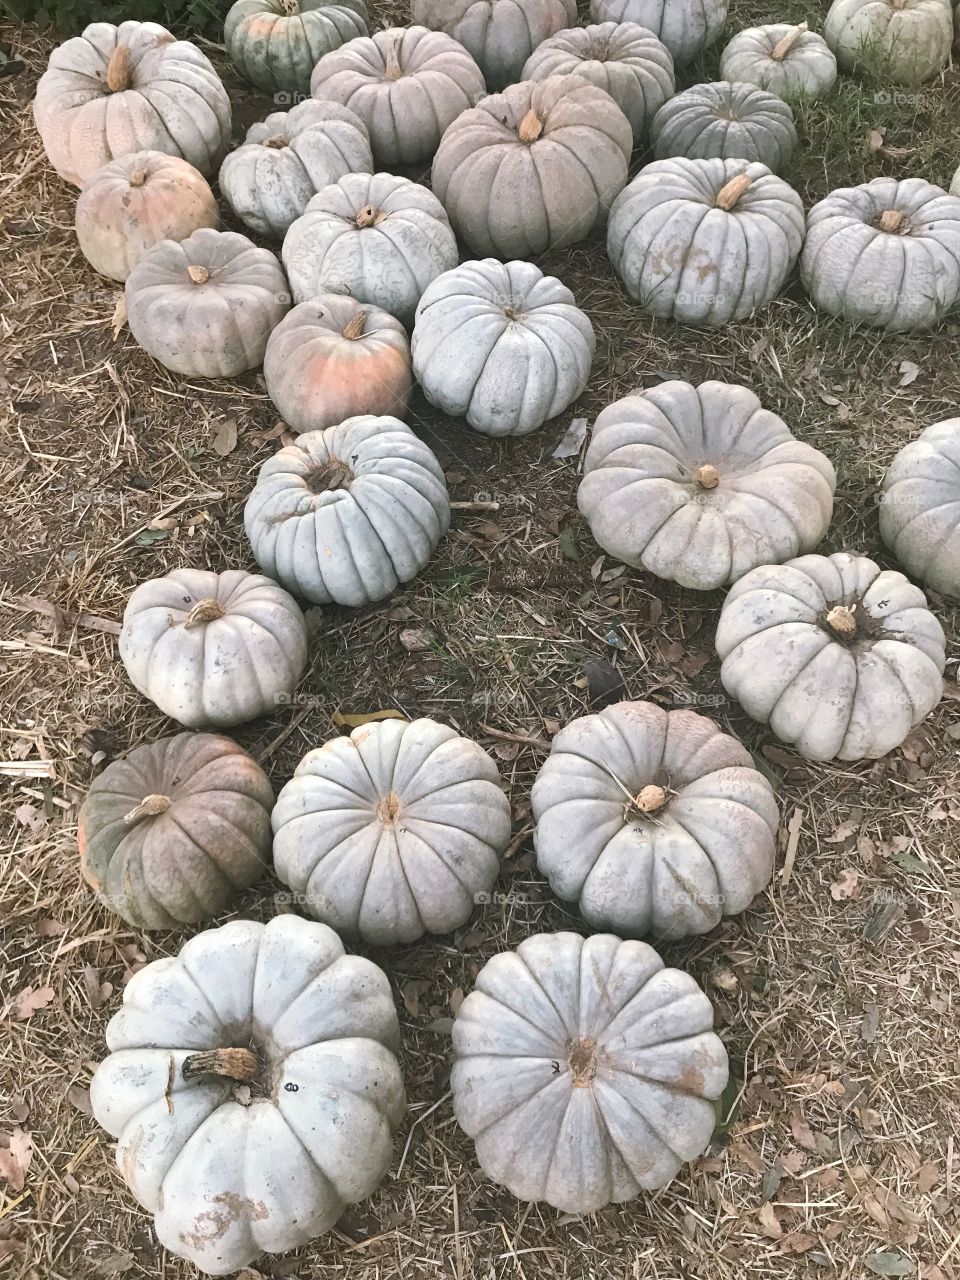 Beautifully colored pumpkins for sale at the pumpkin patch on crisp October afternoon. America, USA 